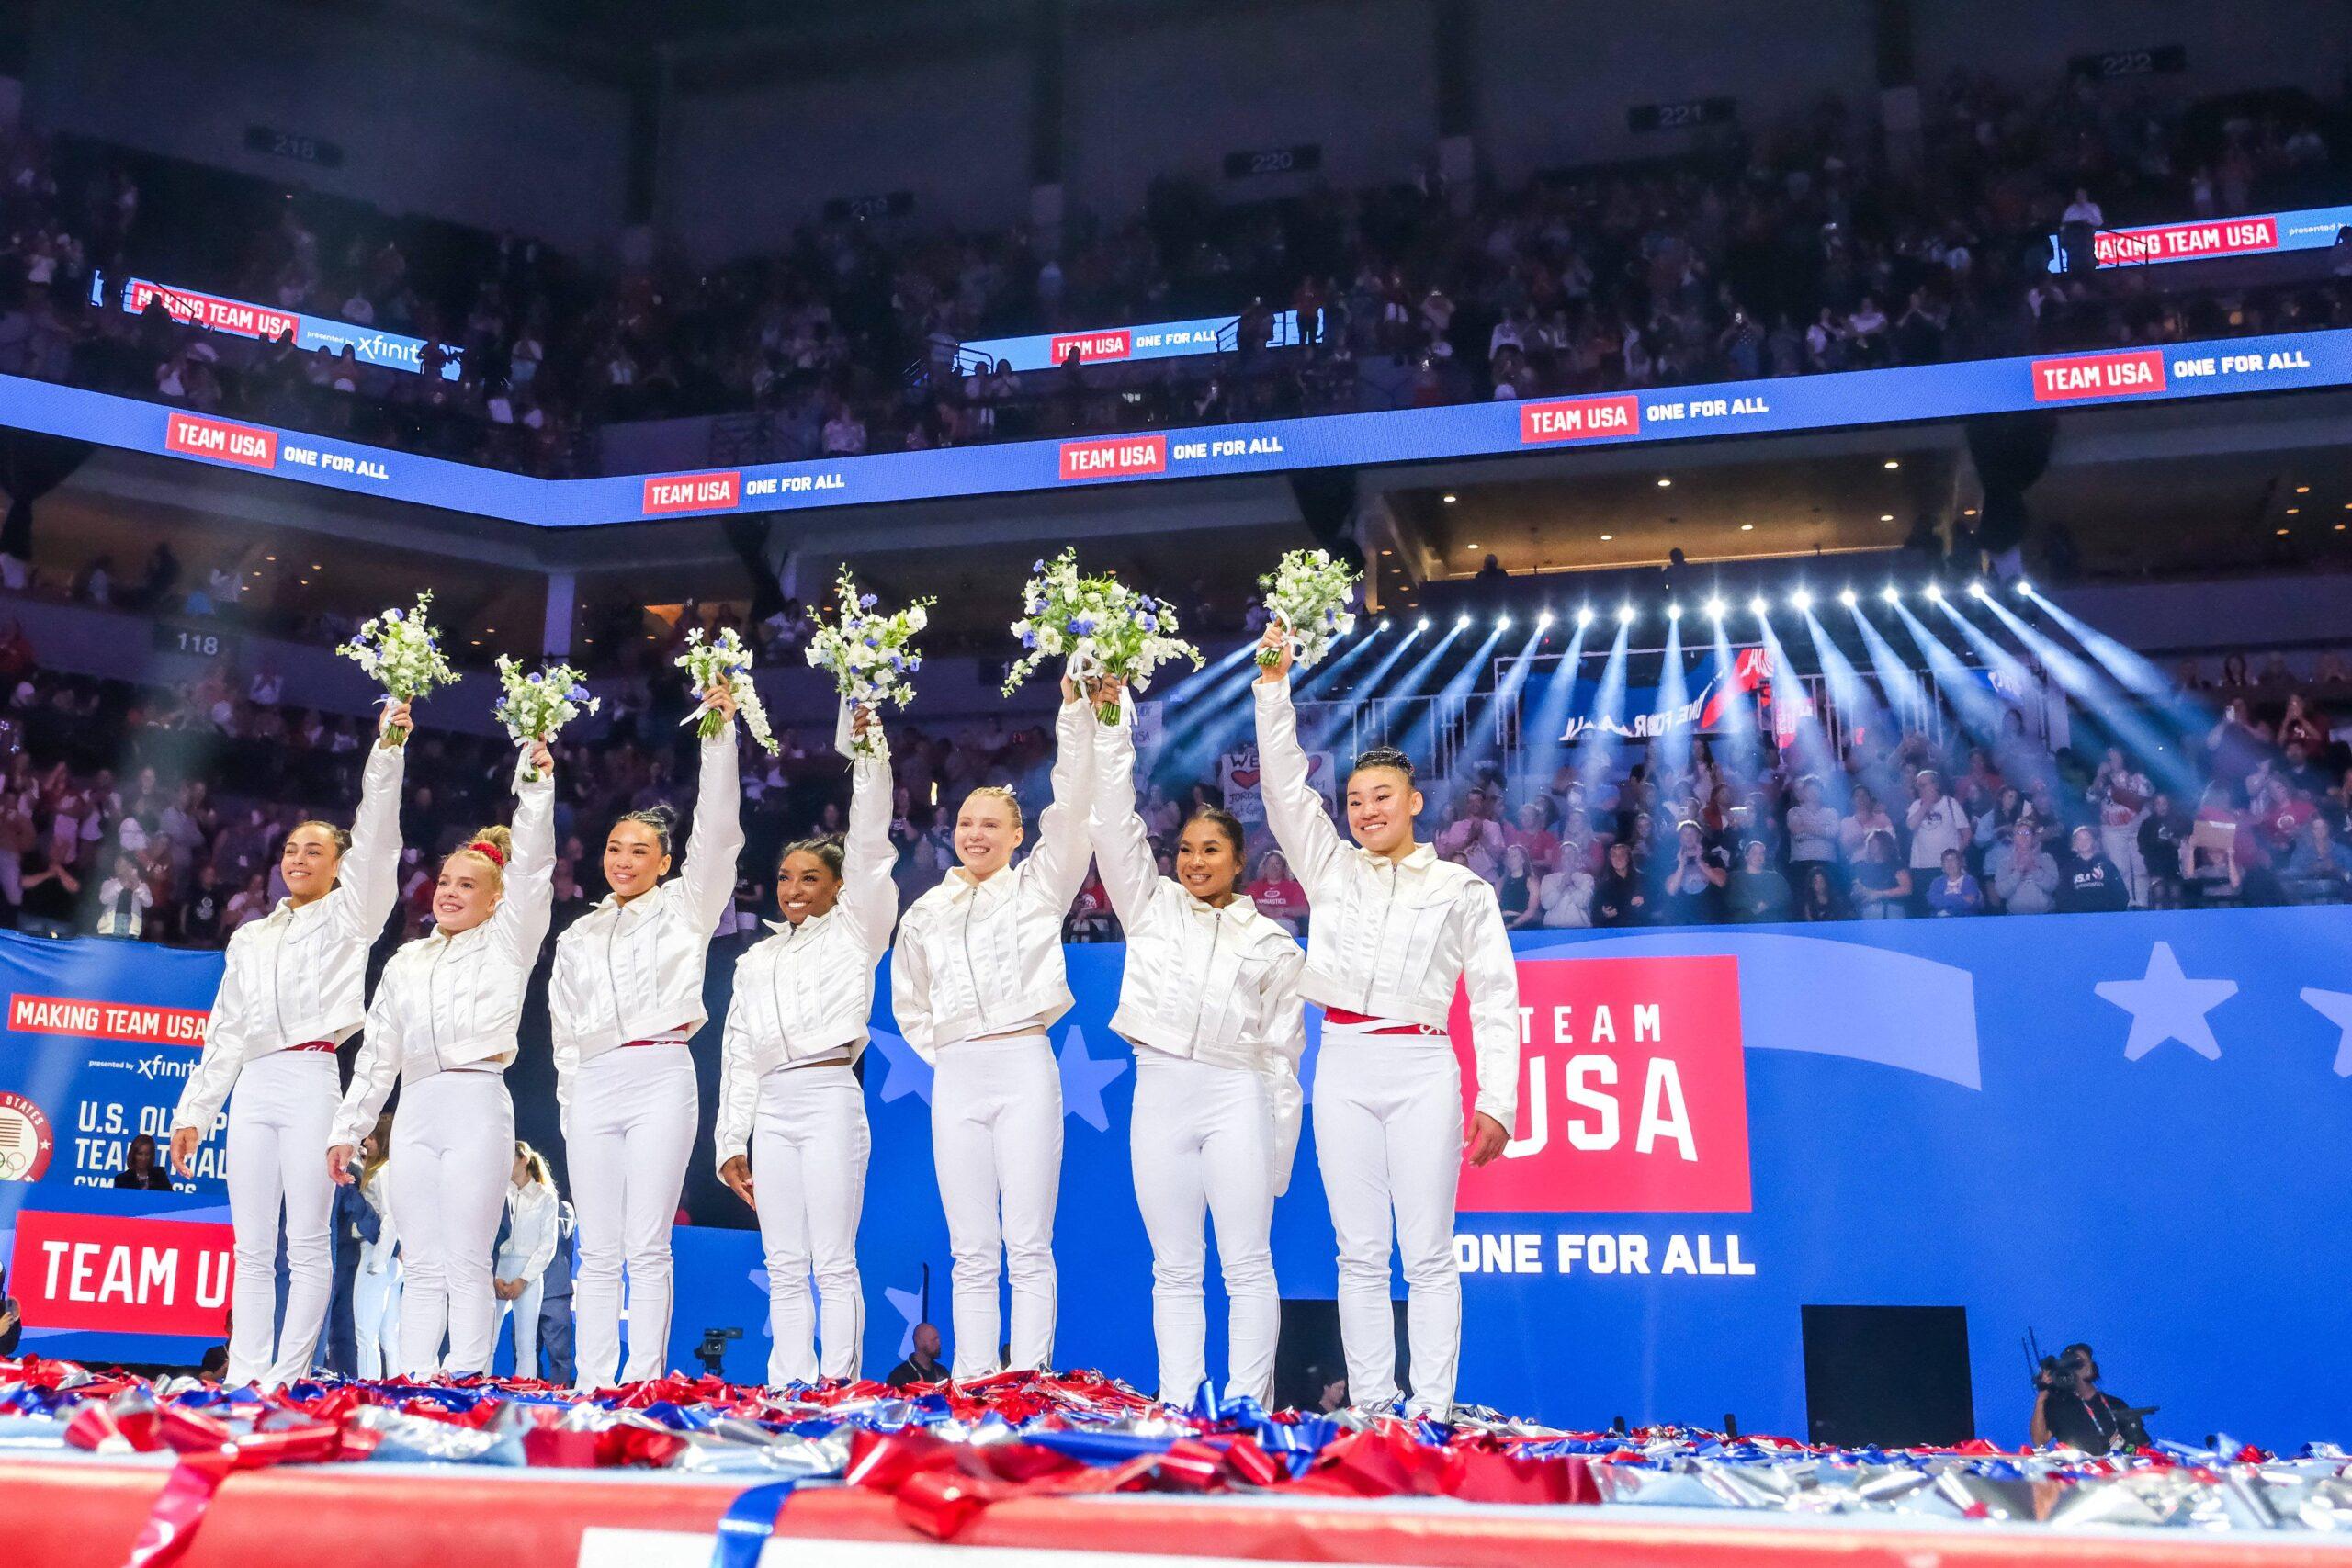 Team USA celebrating at the 2024 Olympic Trials